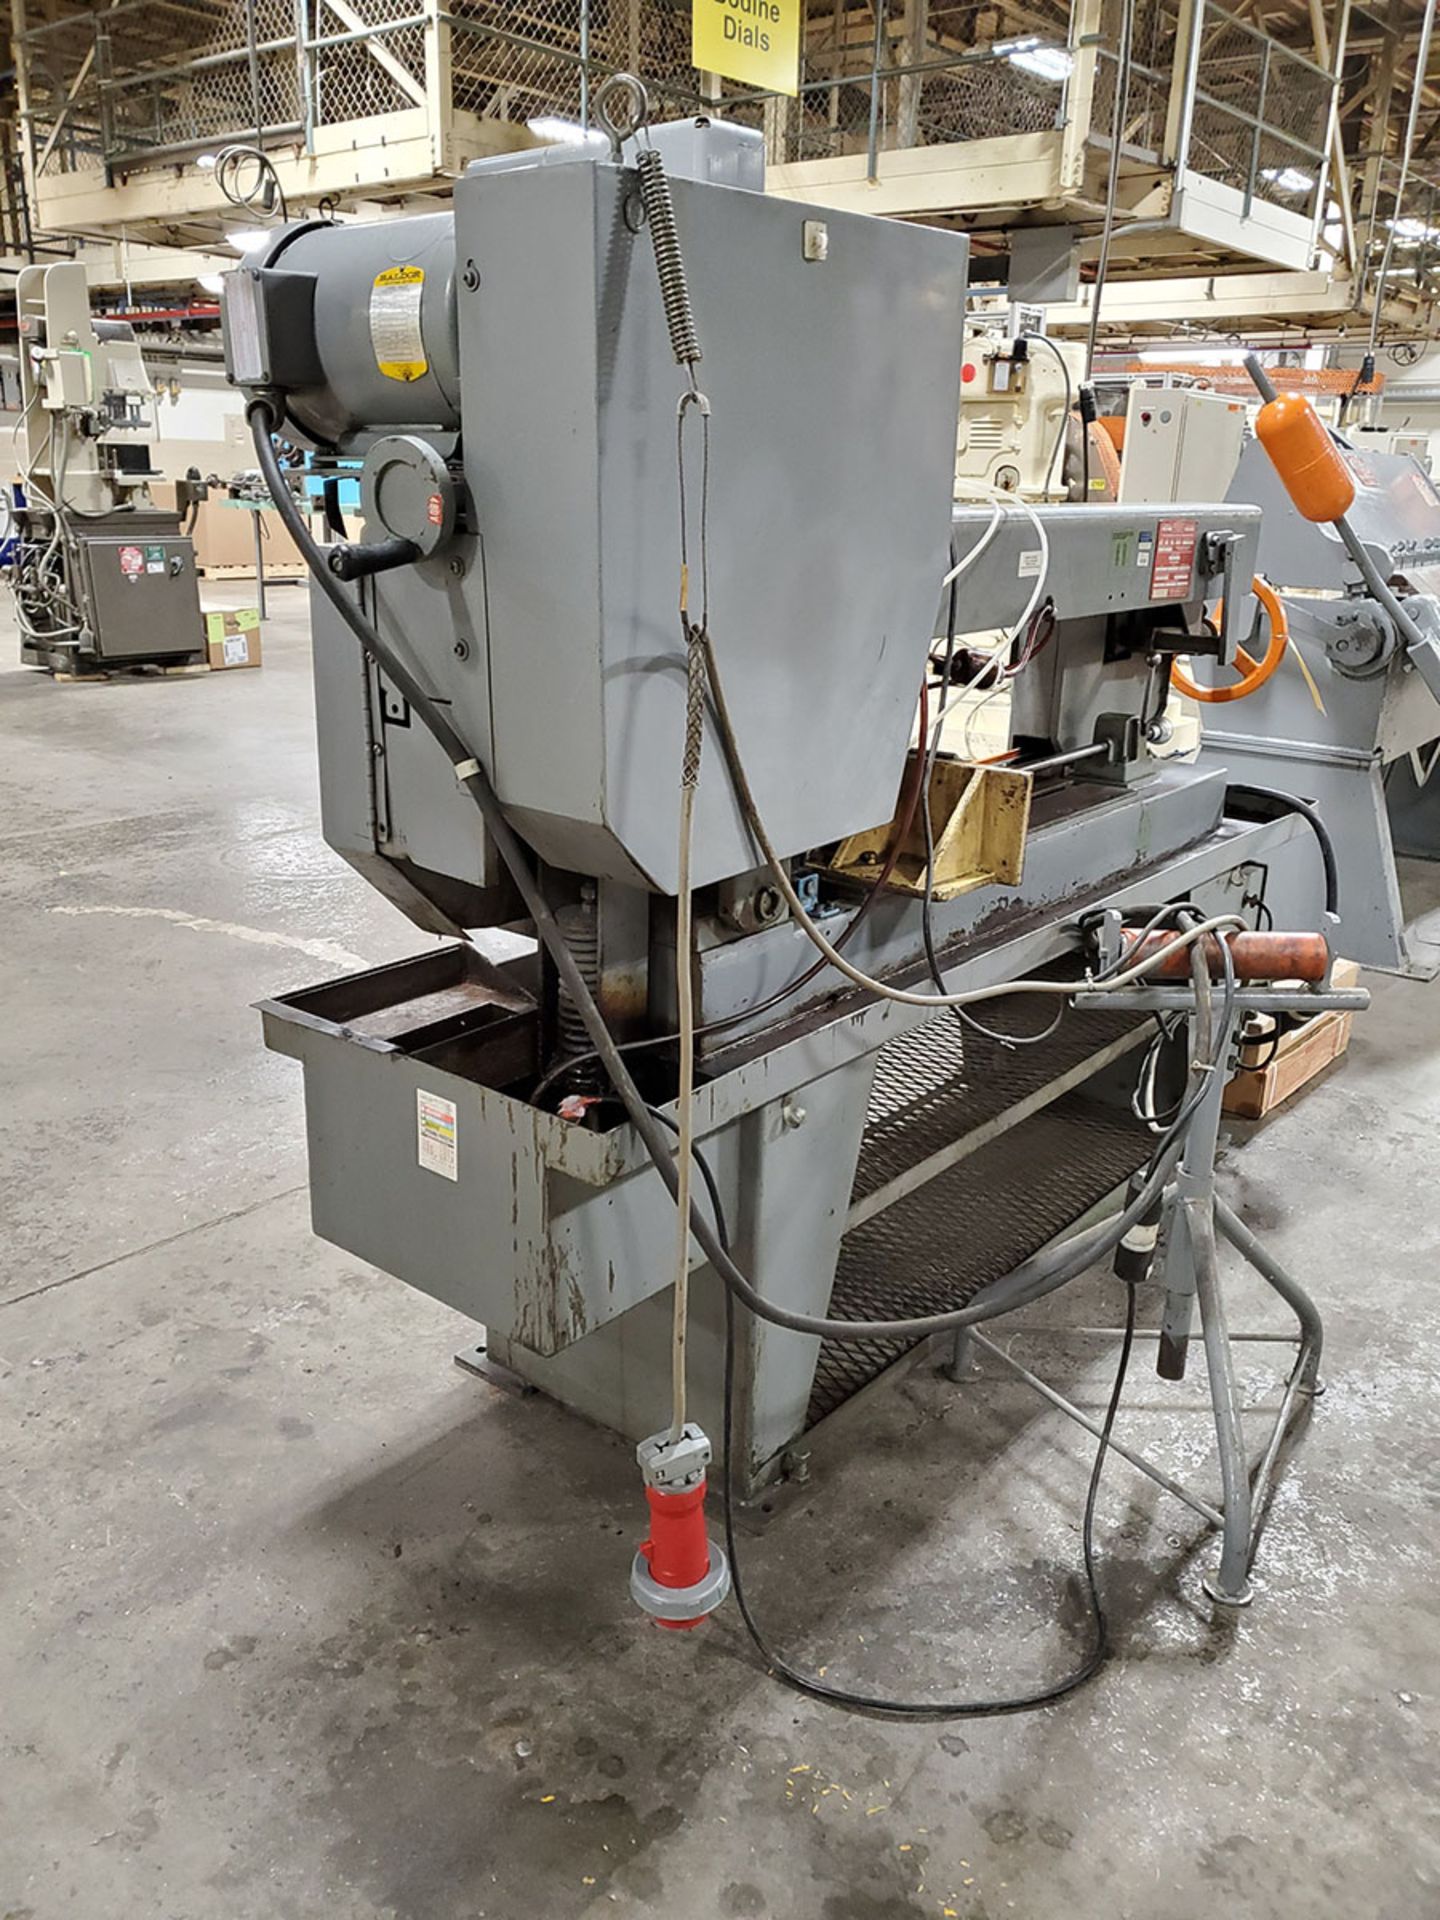 DO-ALL MODEL C-916 BANDSAW METAL CUTTING; MODEL C-915, S/N 438-882018, 3-PHASE, 3.0 NORMAL AMPS, - Image 9 of 9